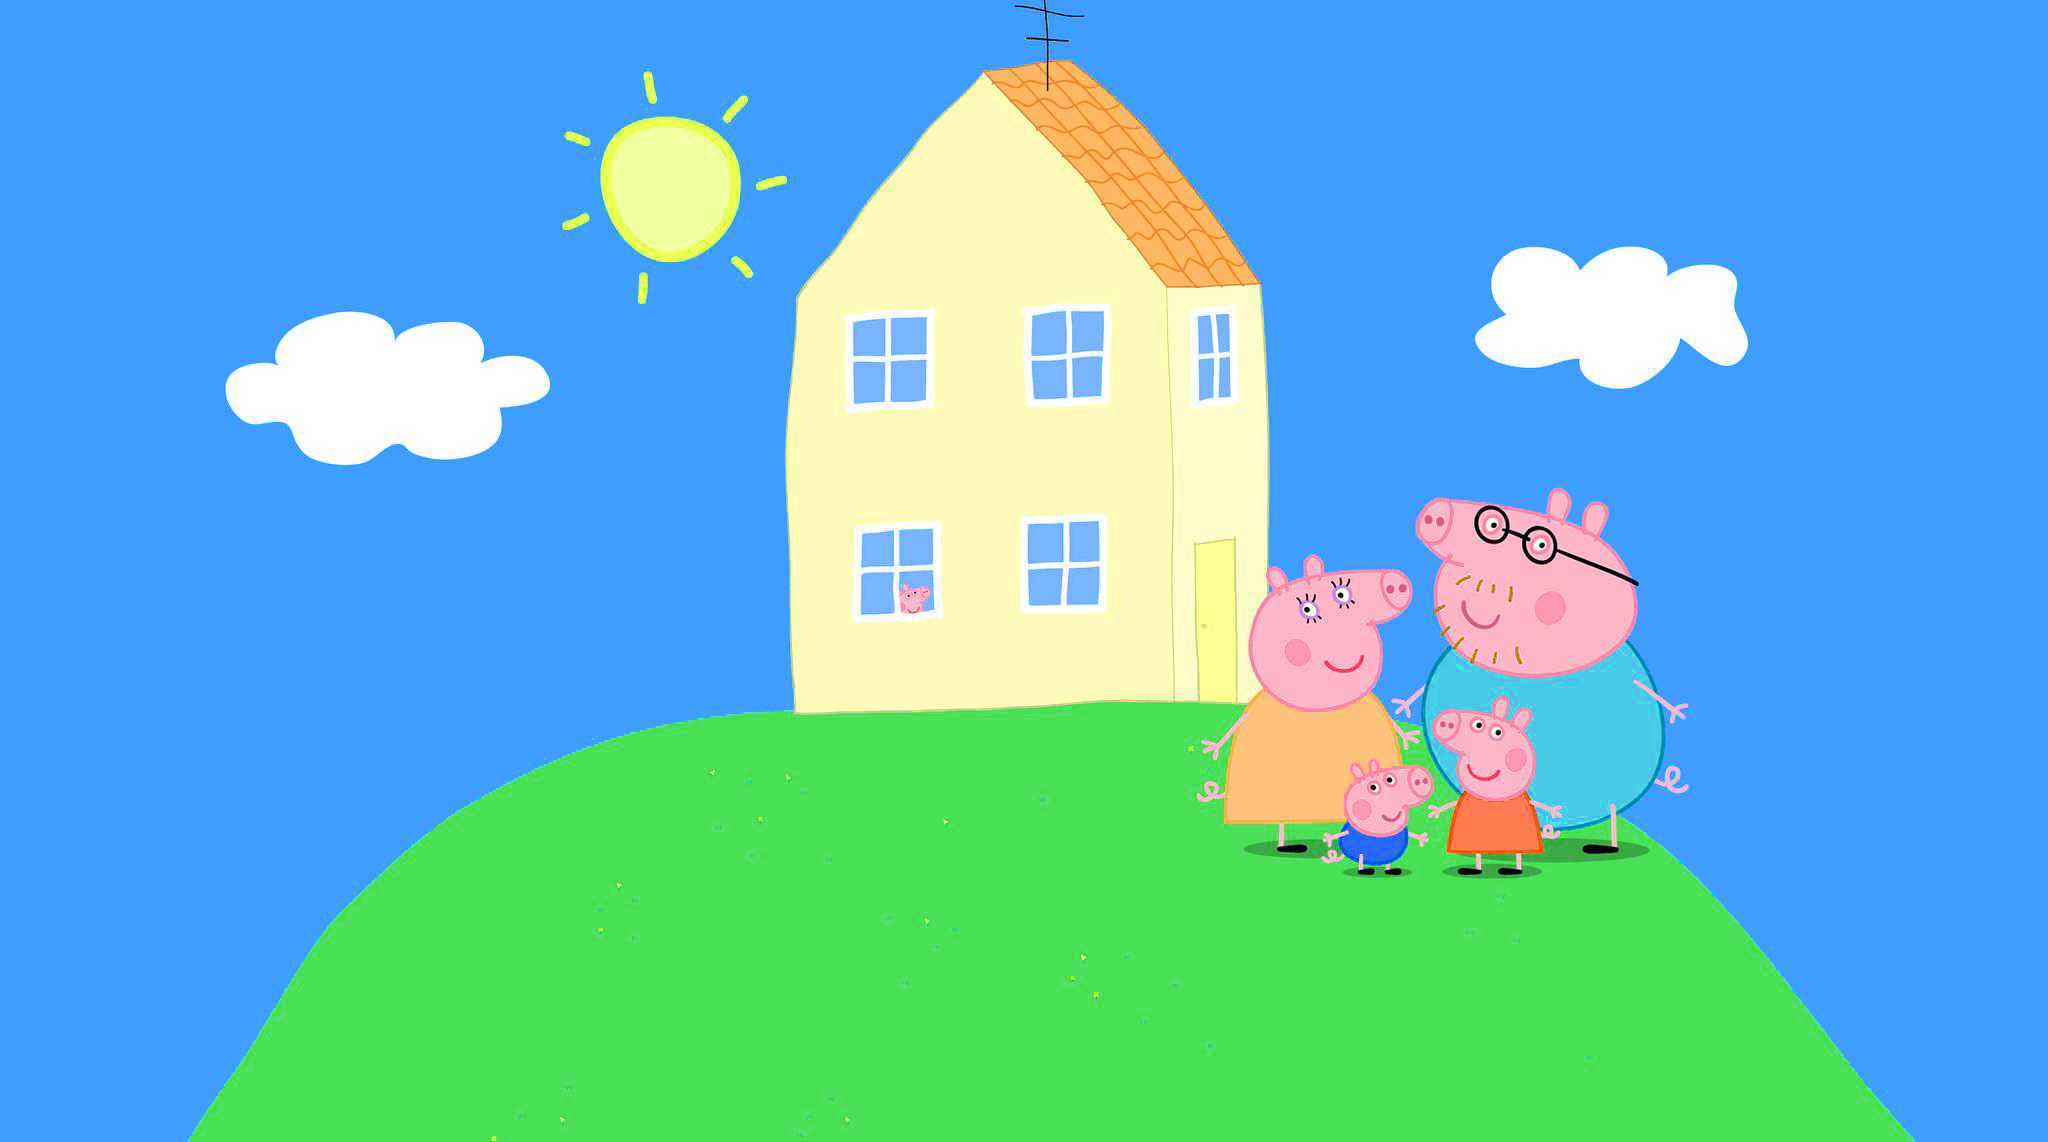 peppa pig house wallpaper scary